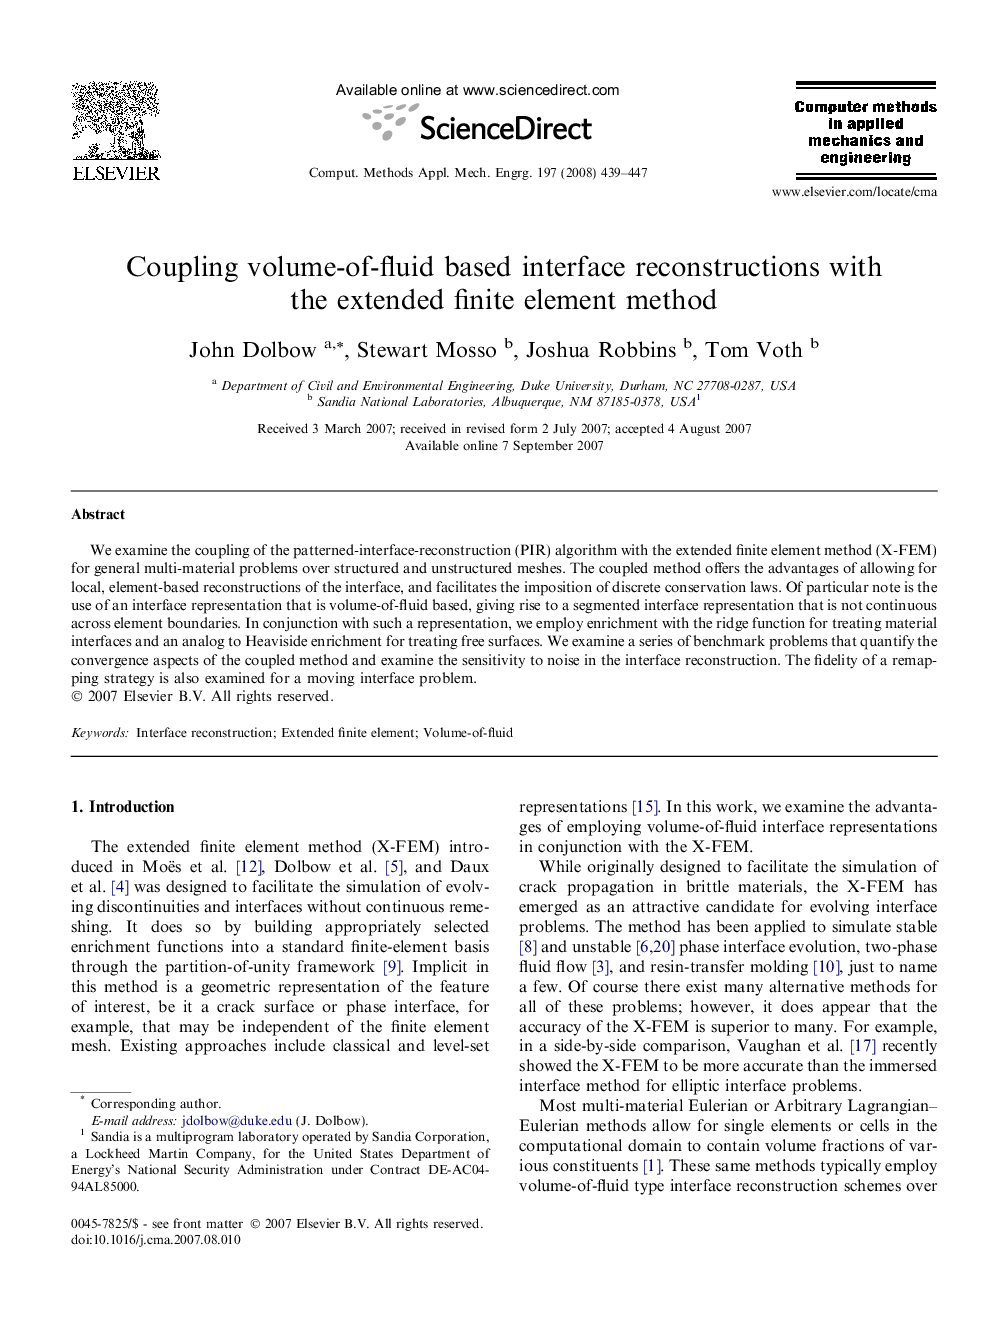 Coupling volume-of-fluid based interface reconstructions with the extended finite element method